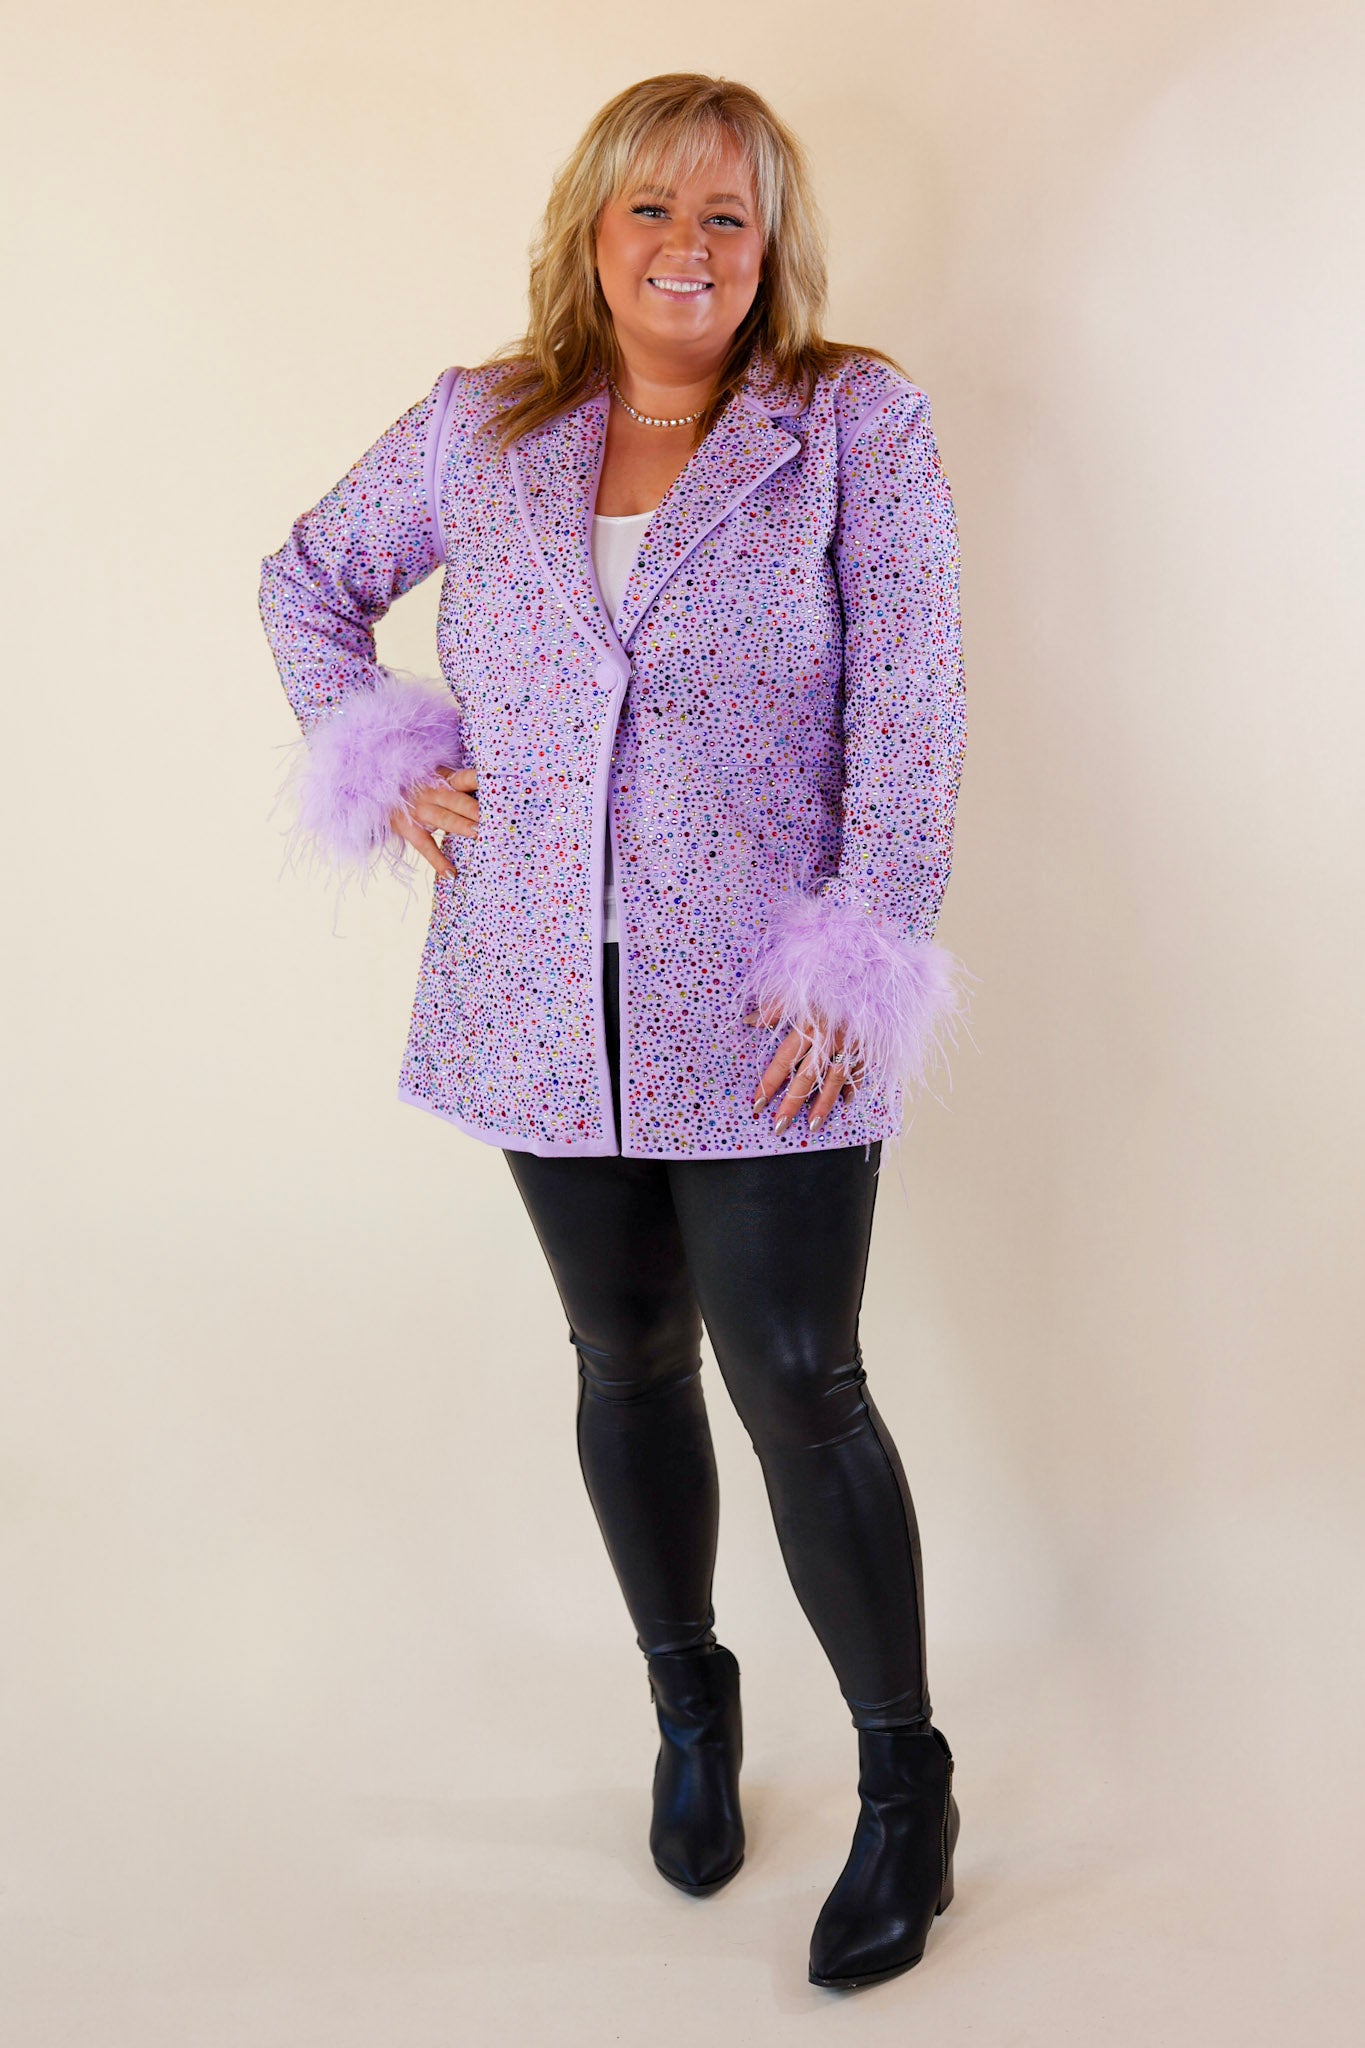 Queen Of Sparkles | Crystal Studded Blazer in Lavender Purple - Giddy Up Glamour Boutique